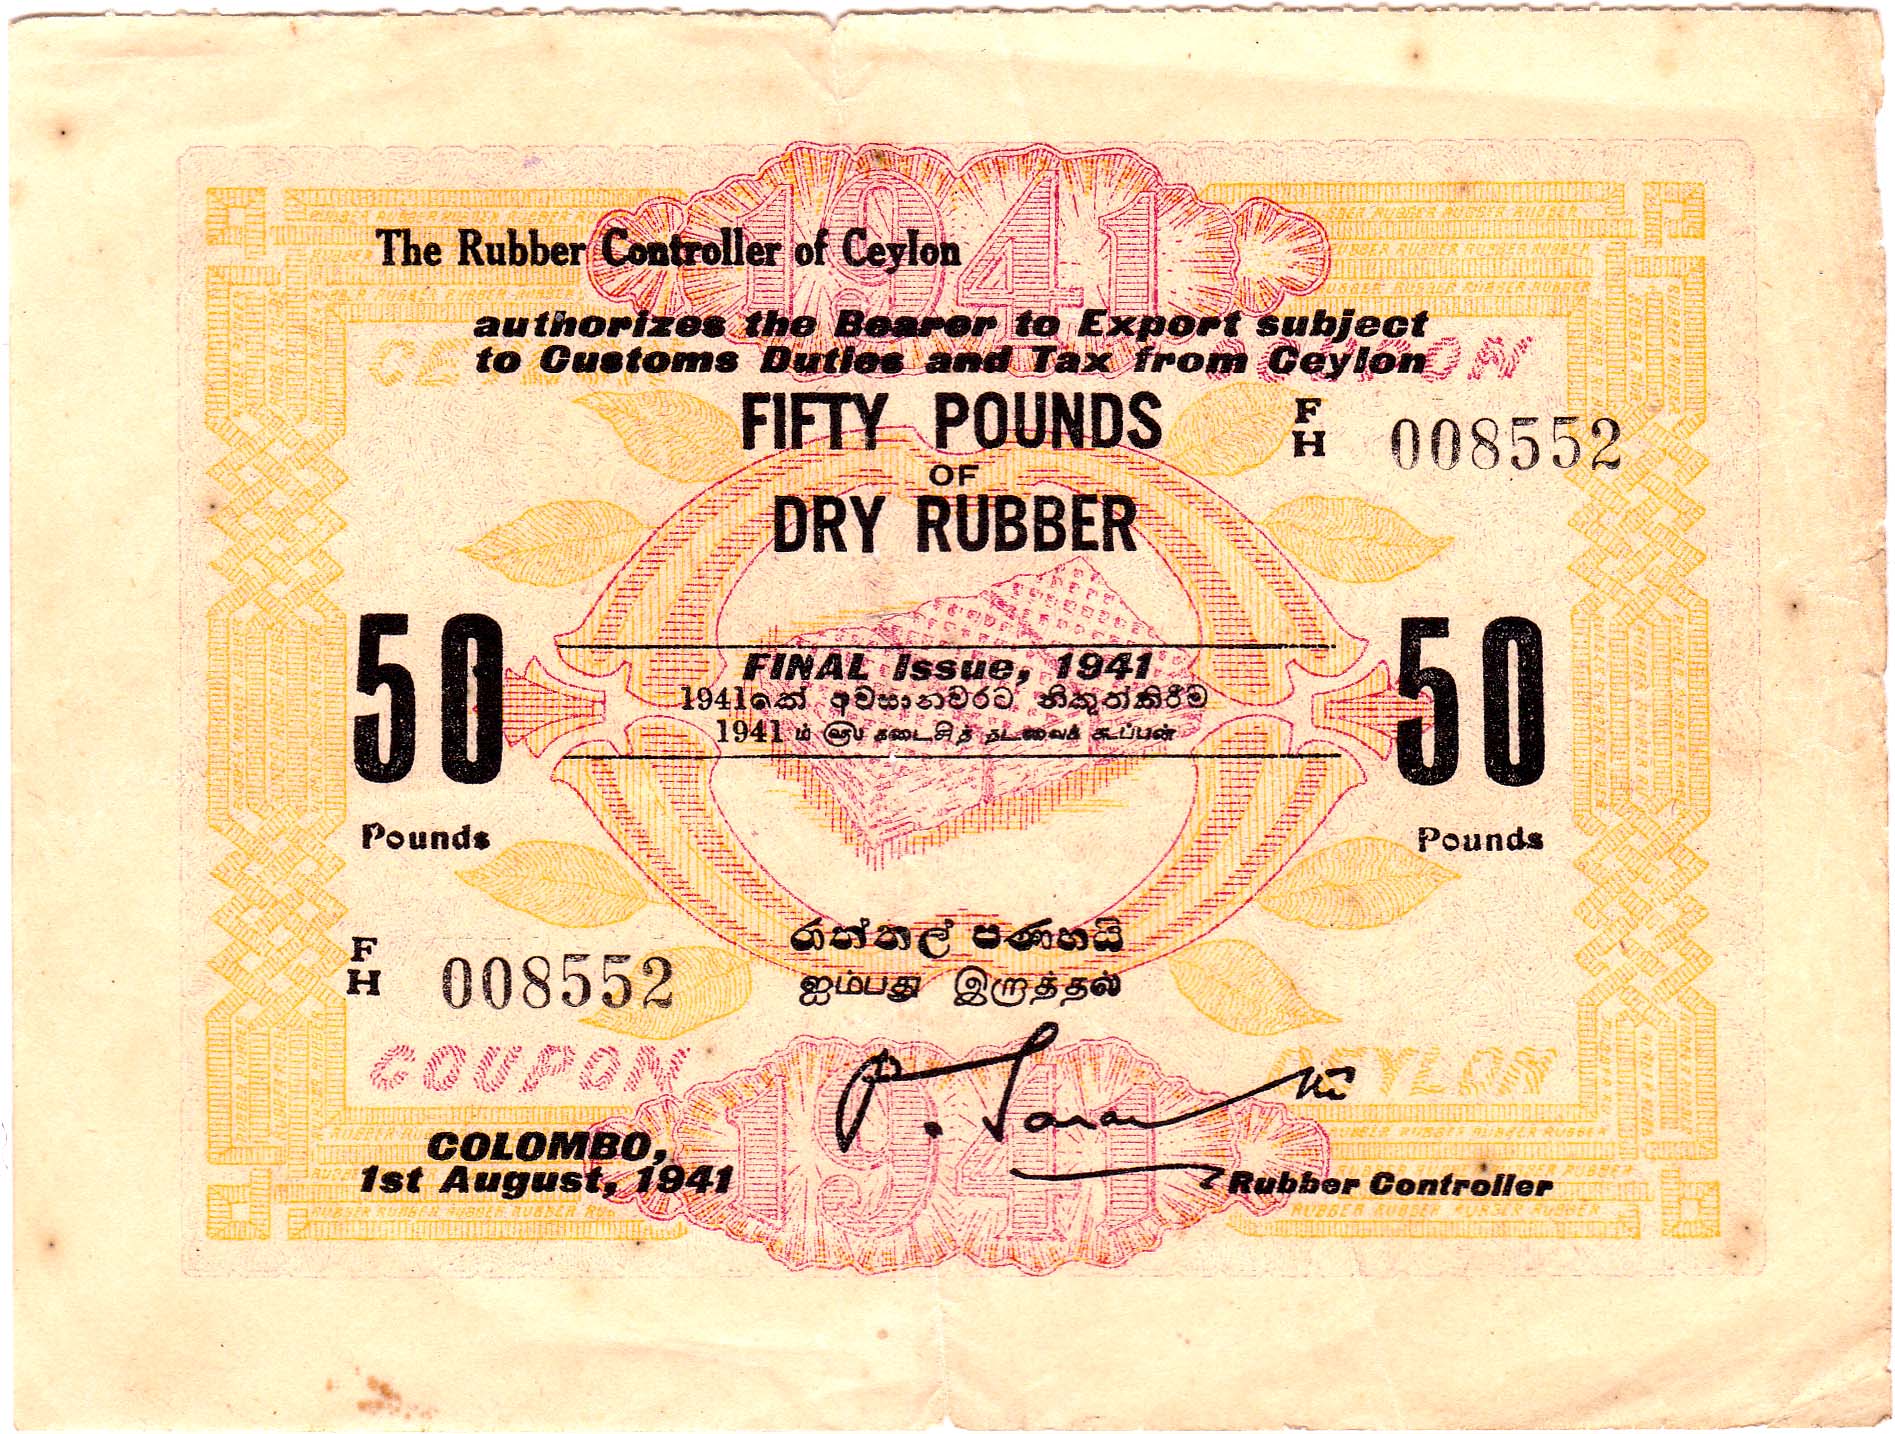 1941_fi_rubbercoupon_50lbs_front